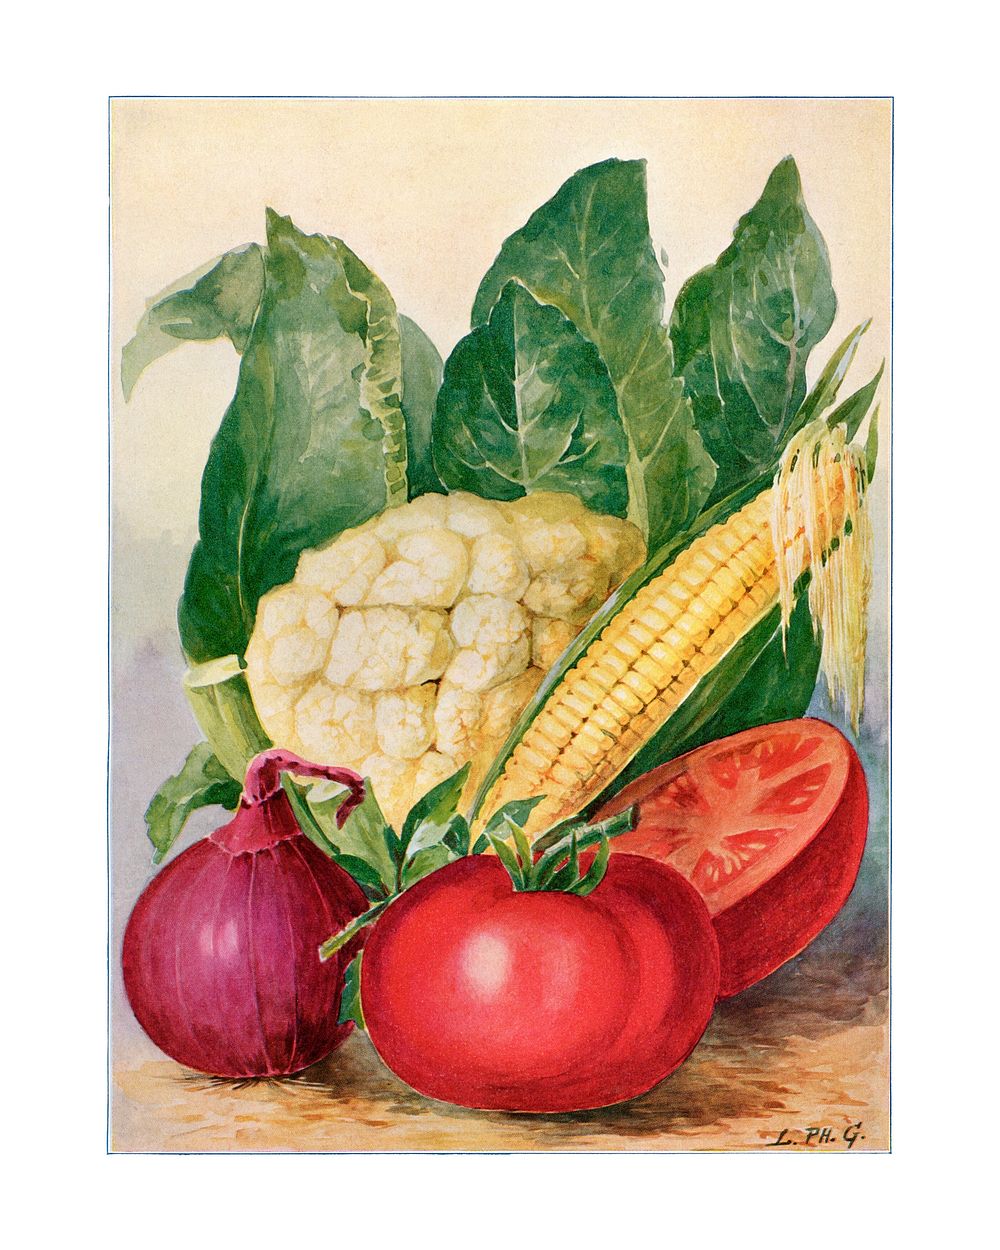 Vegetable illustration, vintage watercolor design, digitally enhanced from our own original copy of The Open Door to…